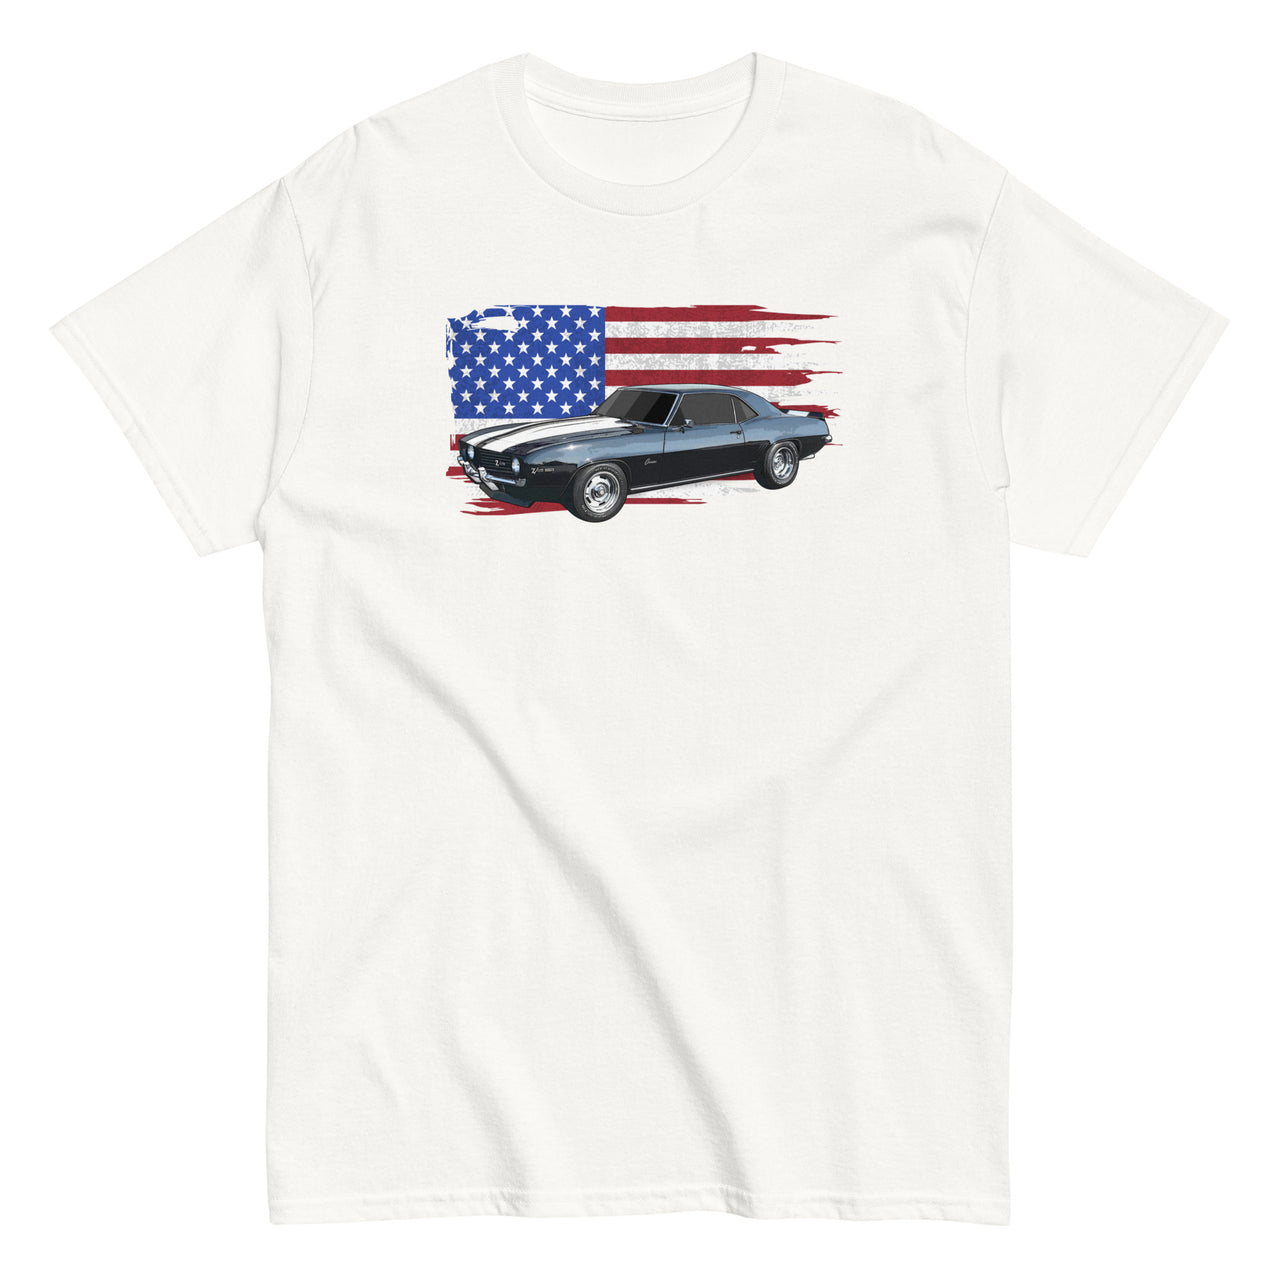 69 Camaro T-Shirt With American Flag Background - white